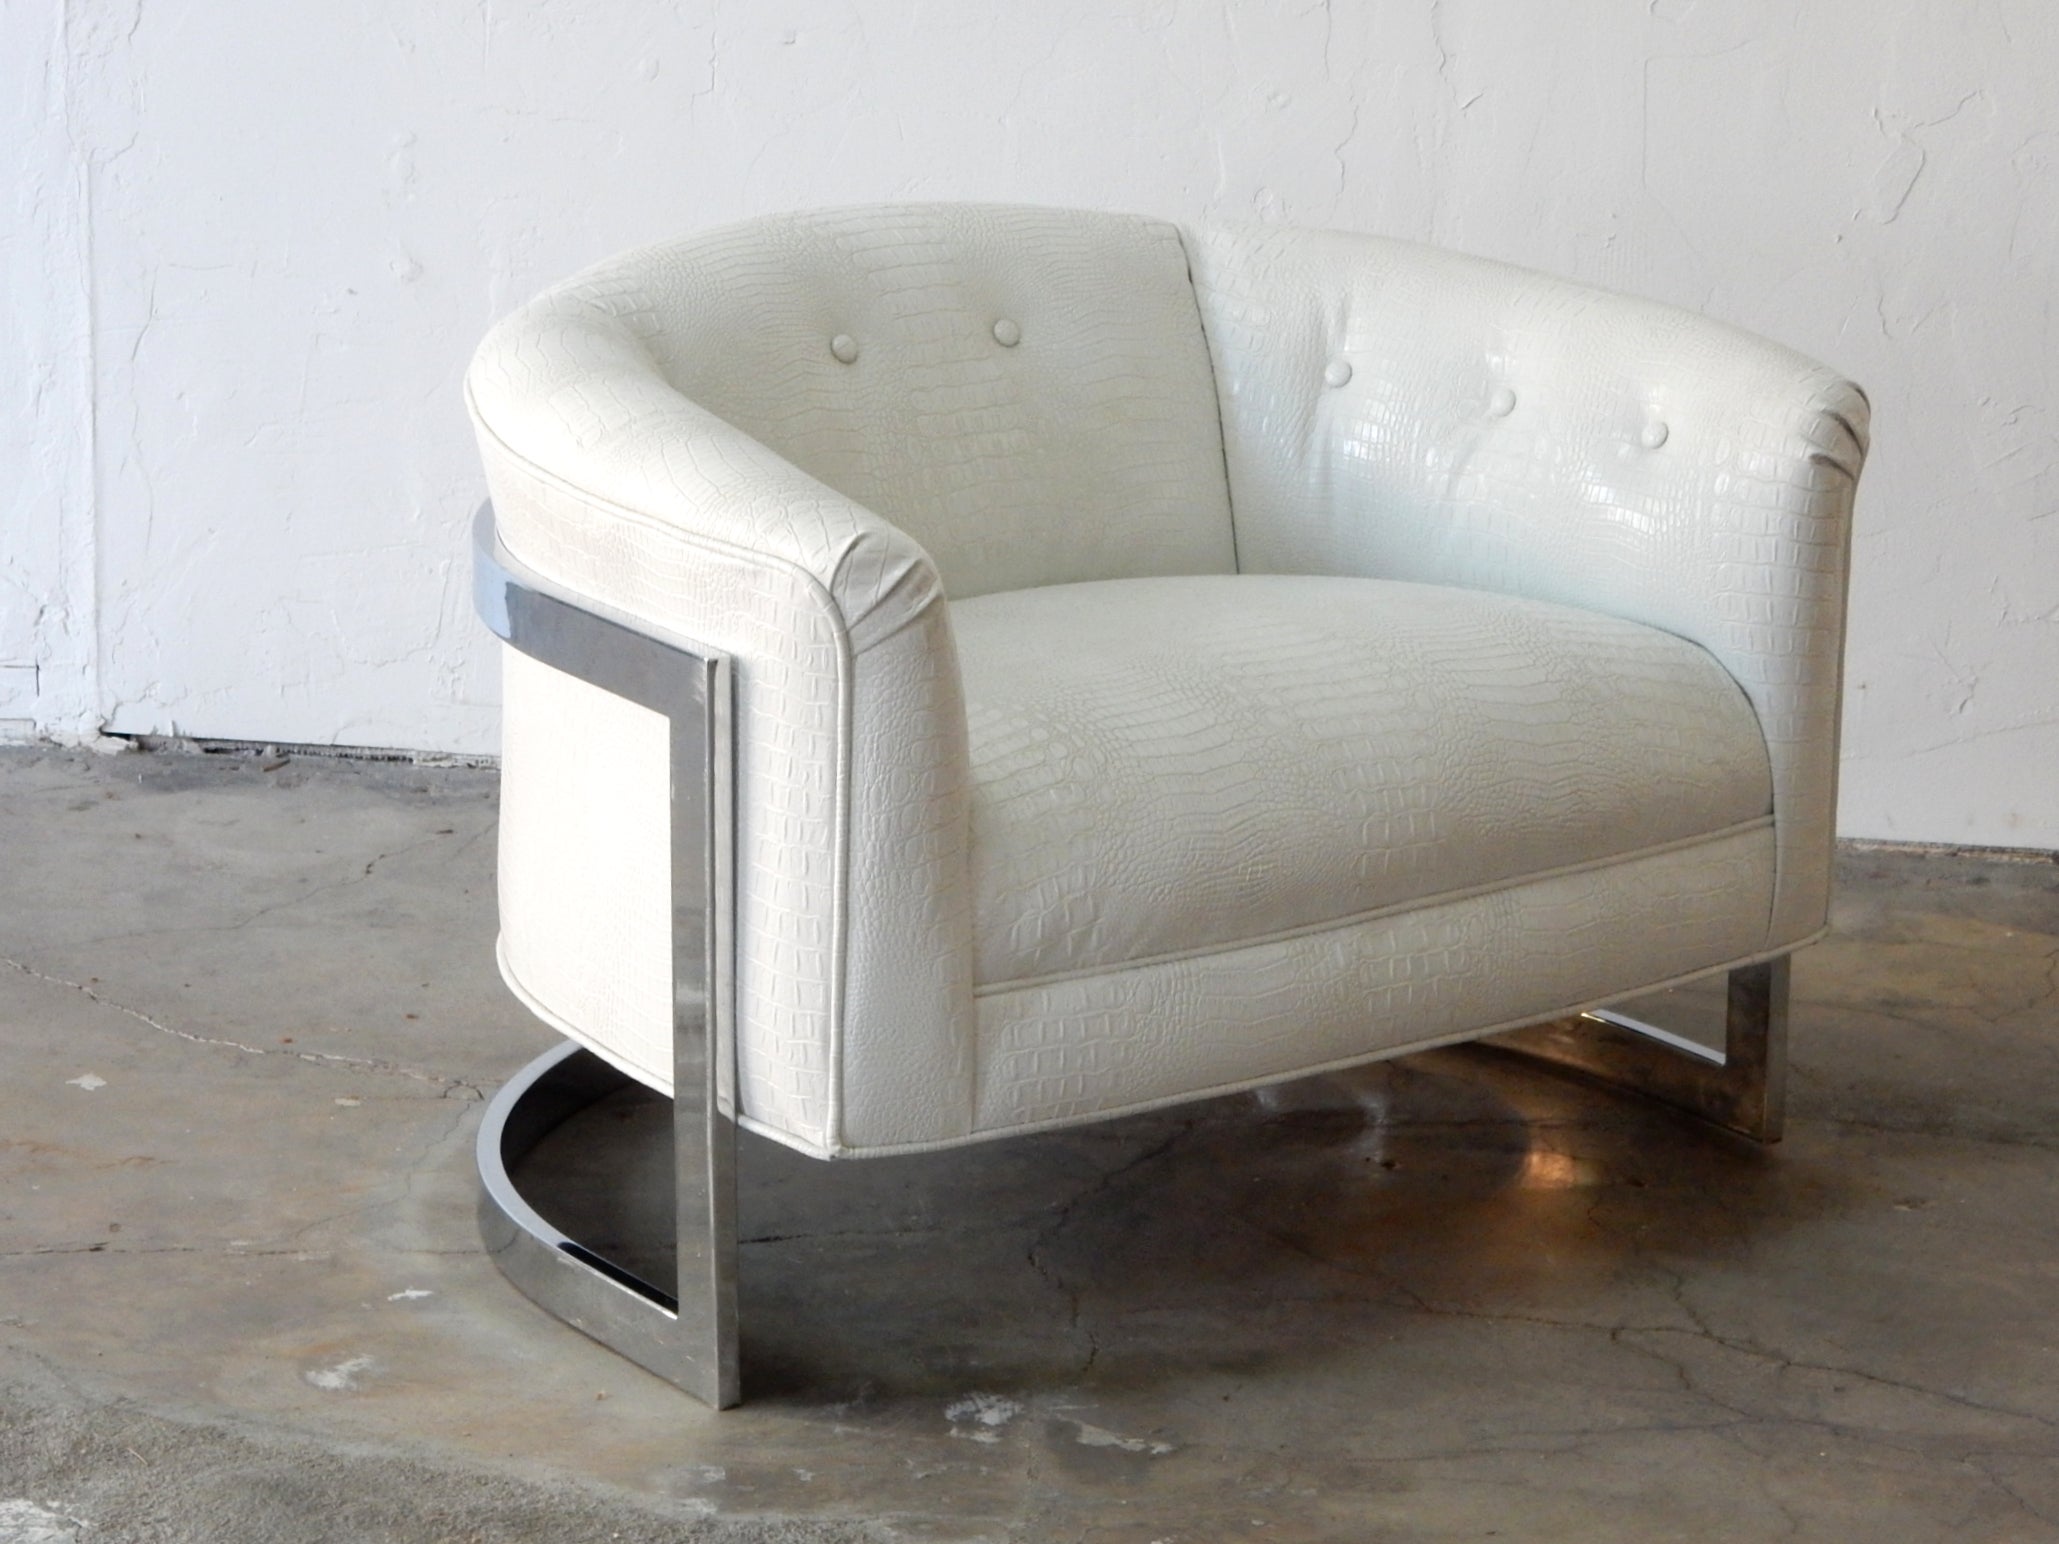 Very large floating cantilever tub chair with chromed steel frame dressed in faux vinyl albino alligator hide upholstery.
This fabulous chair is newly upholstered and extra clean.